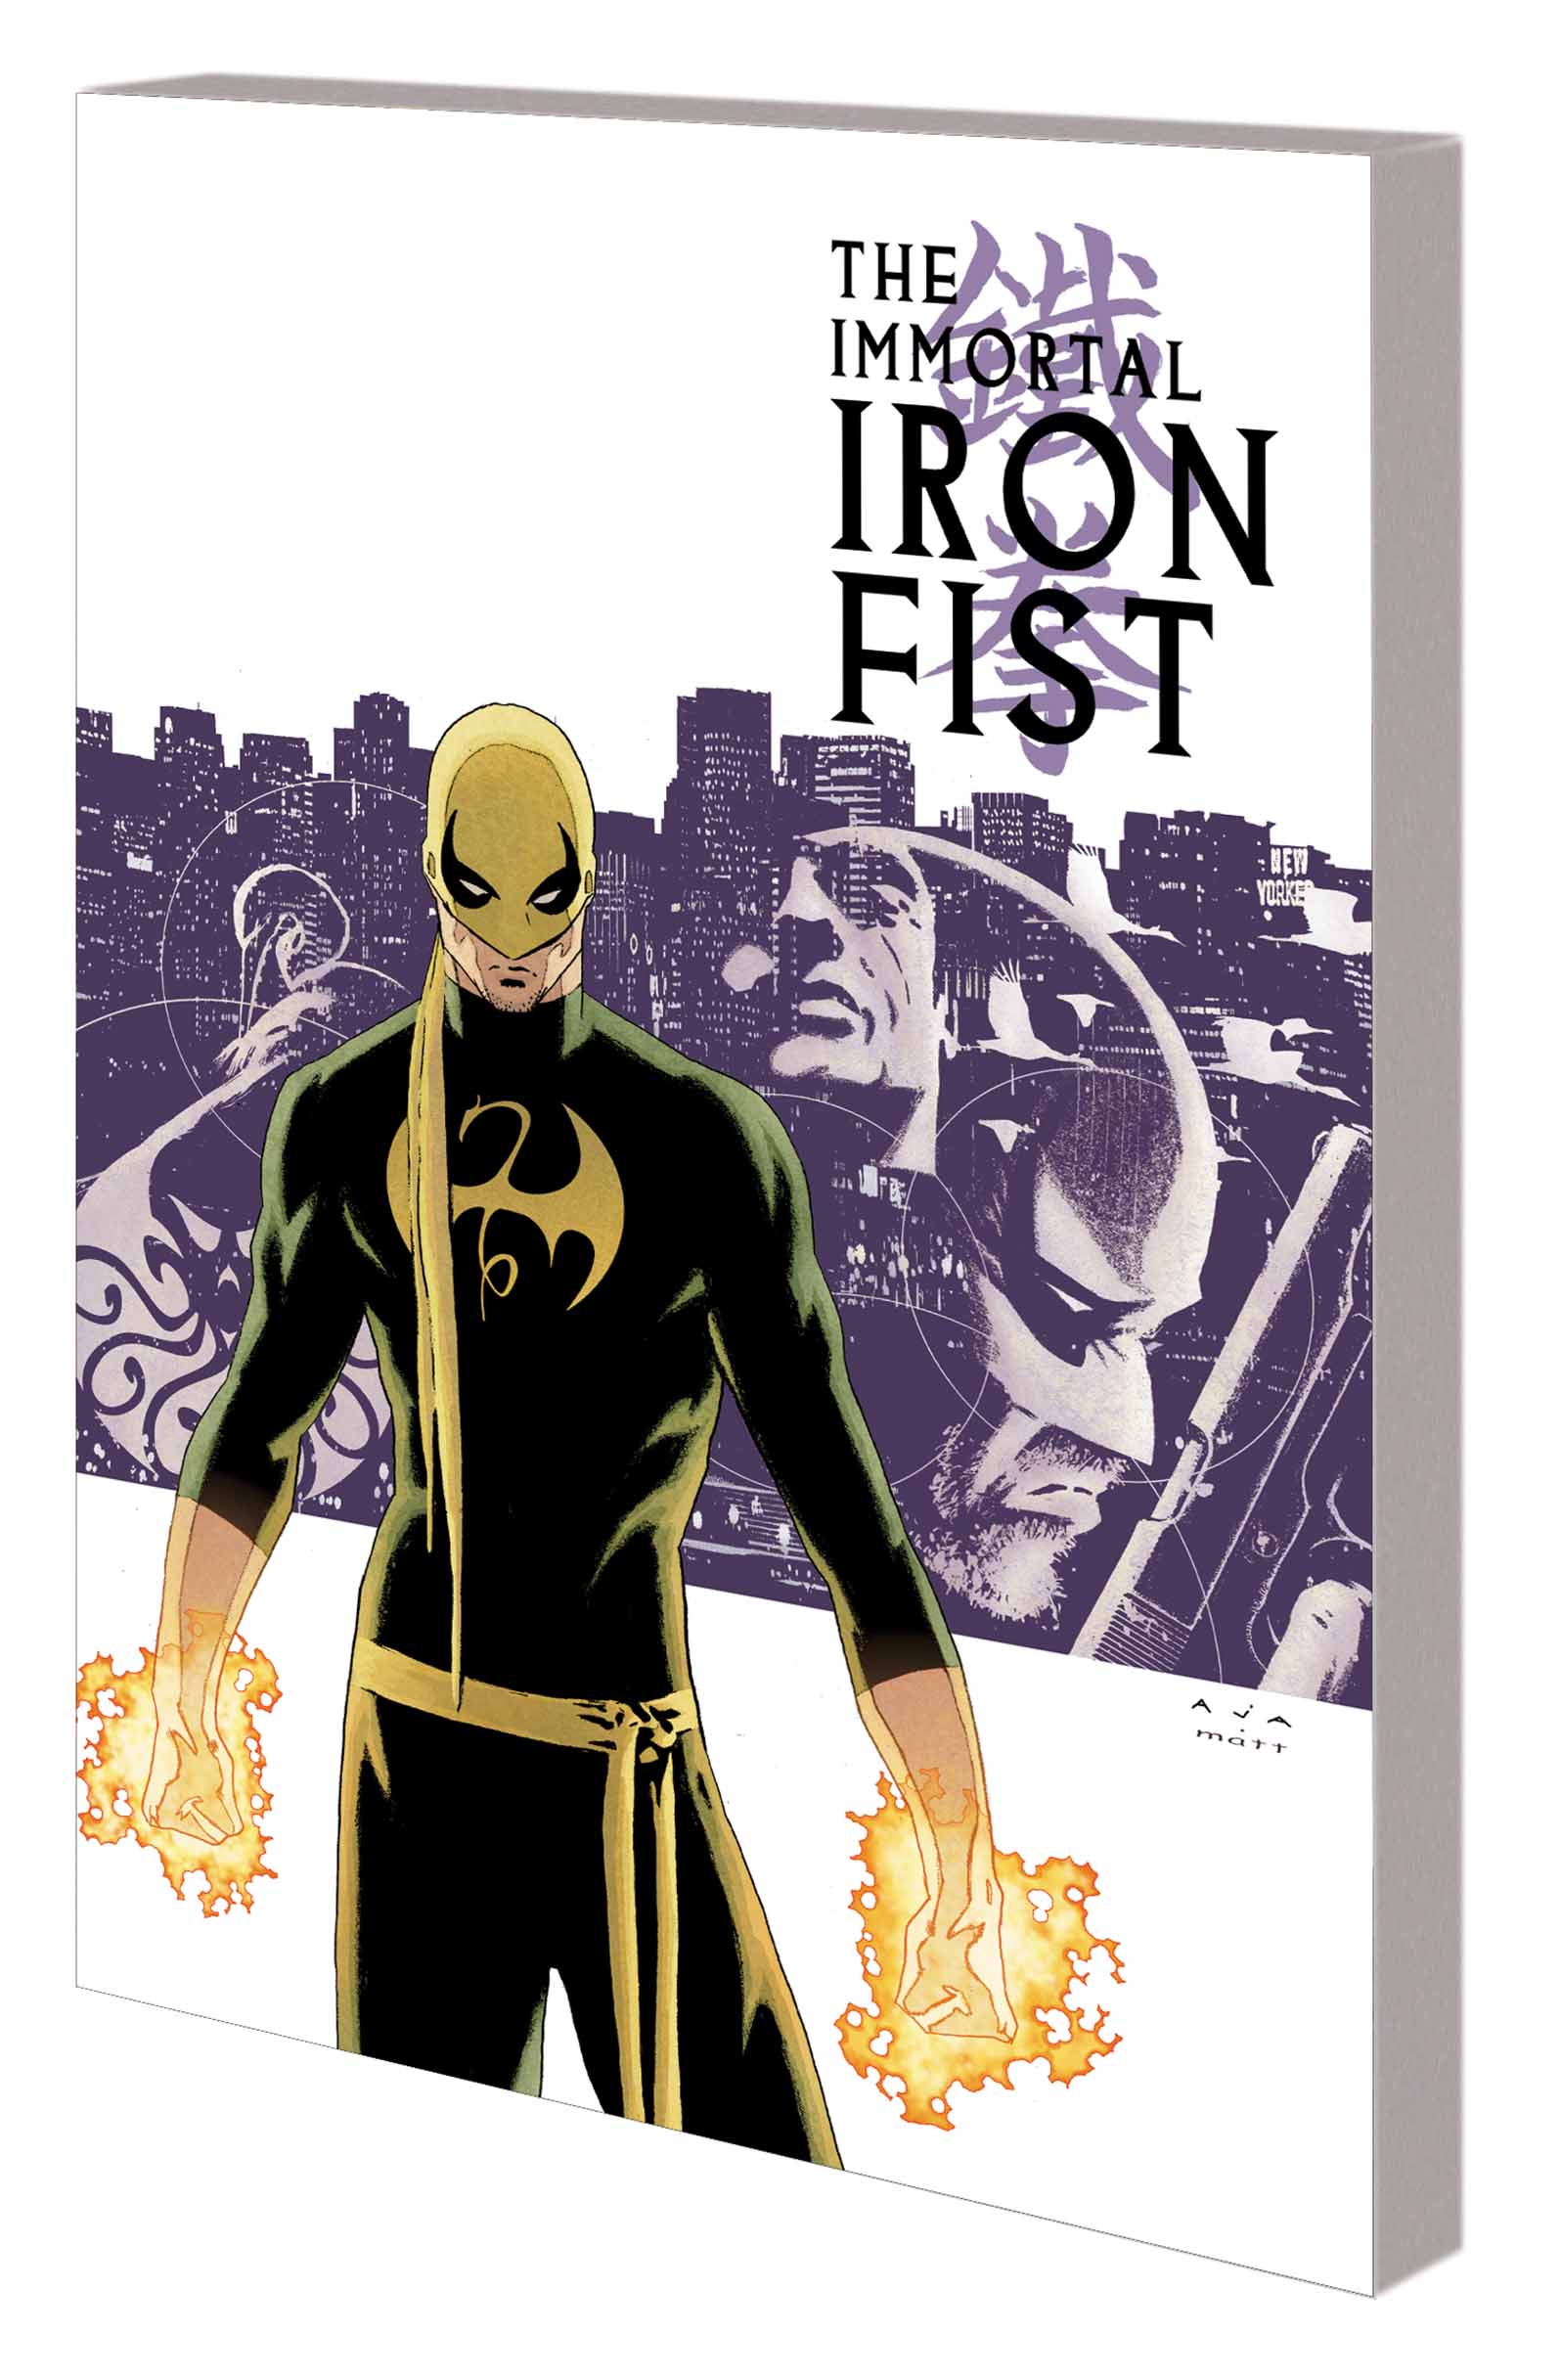 Immortal Iron Fist: The Complete Collection (Trade Paperback)